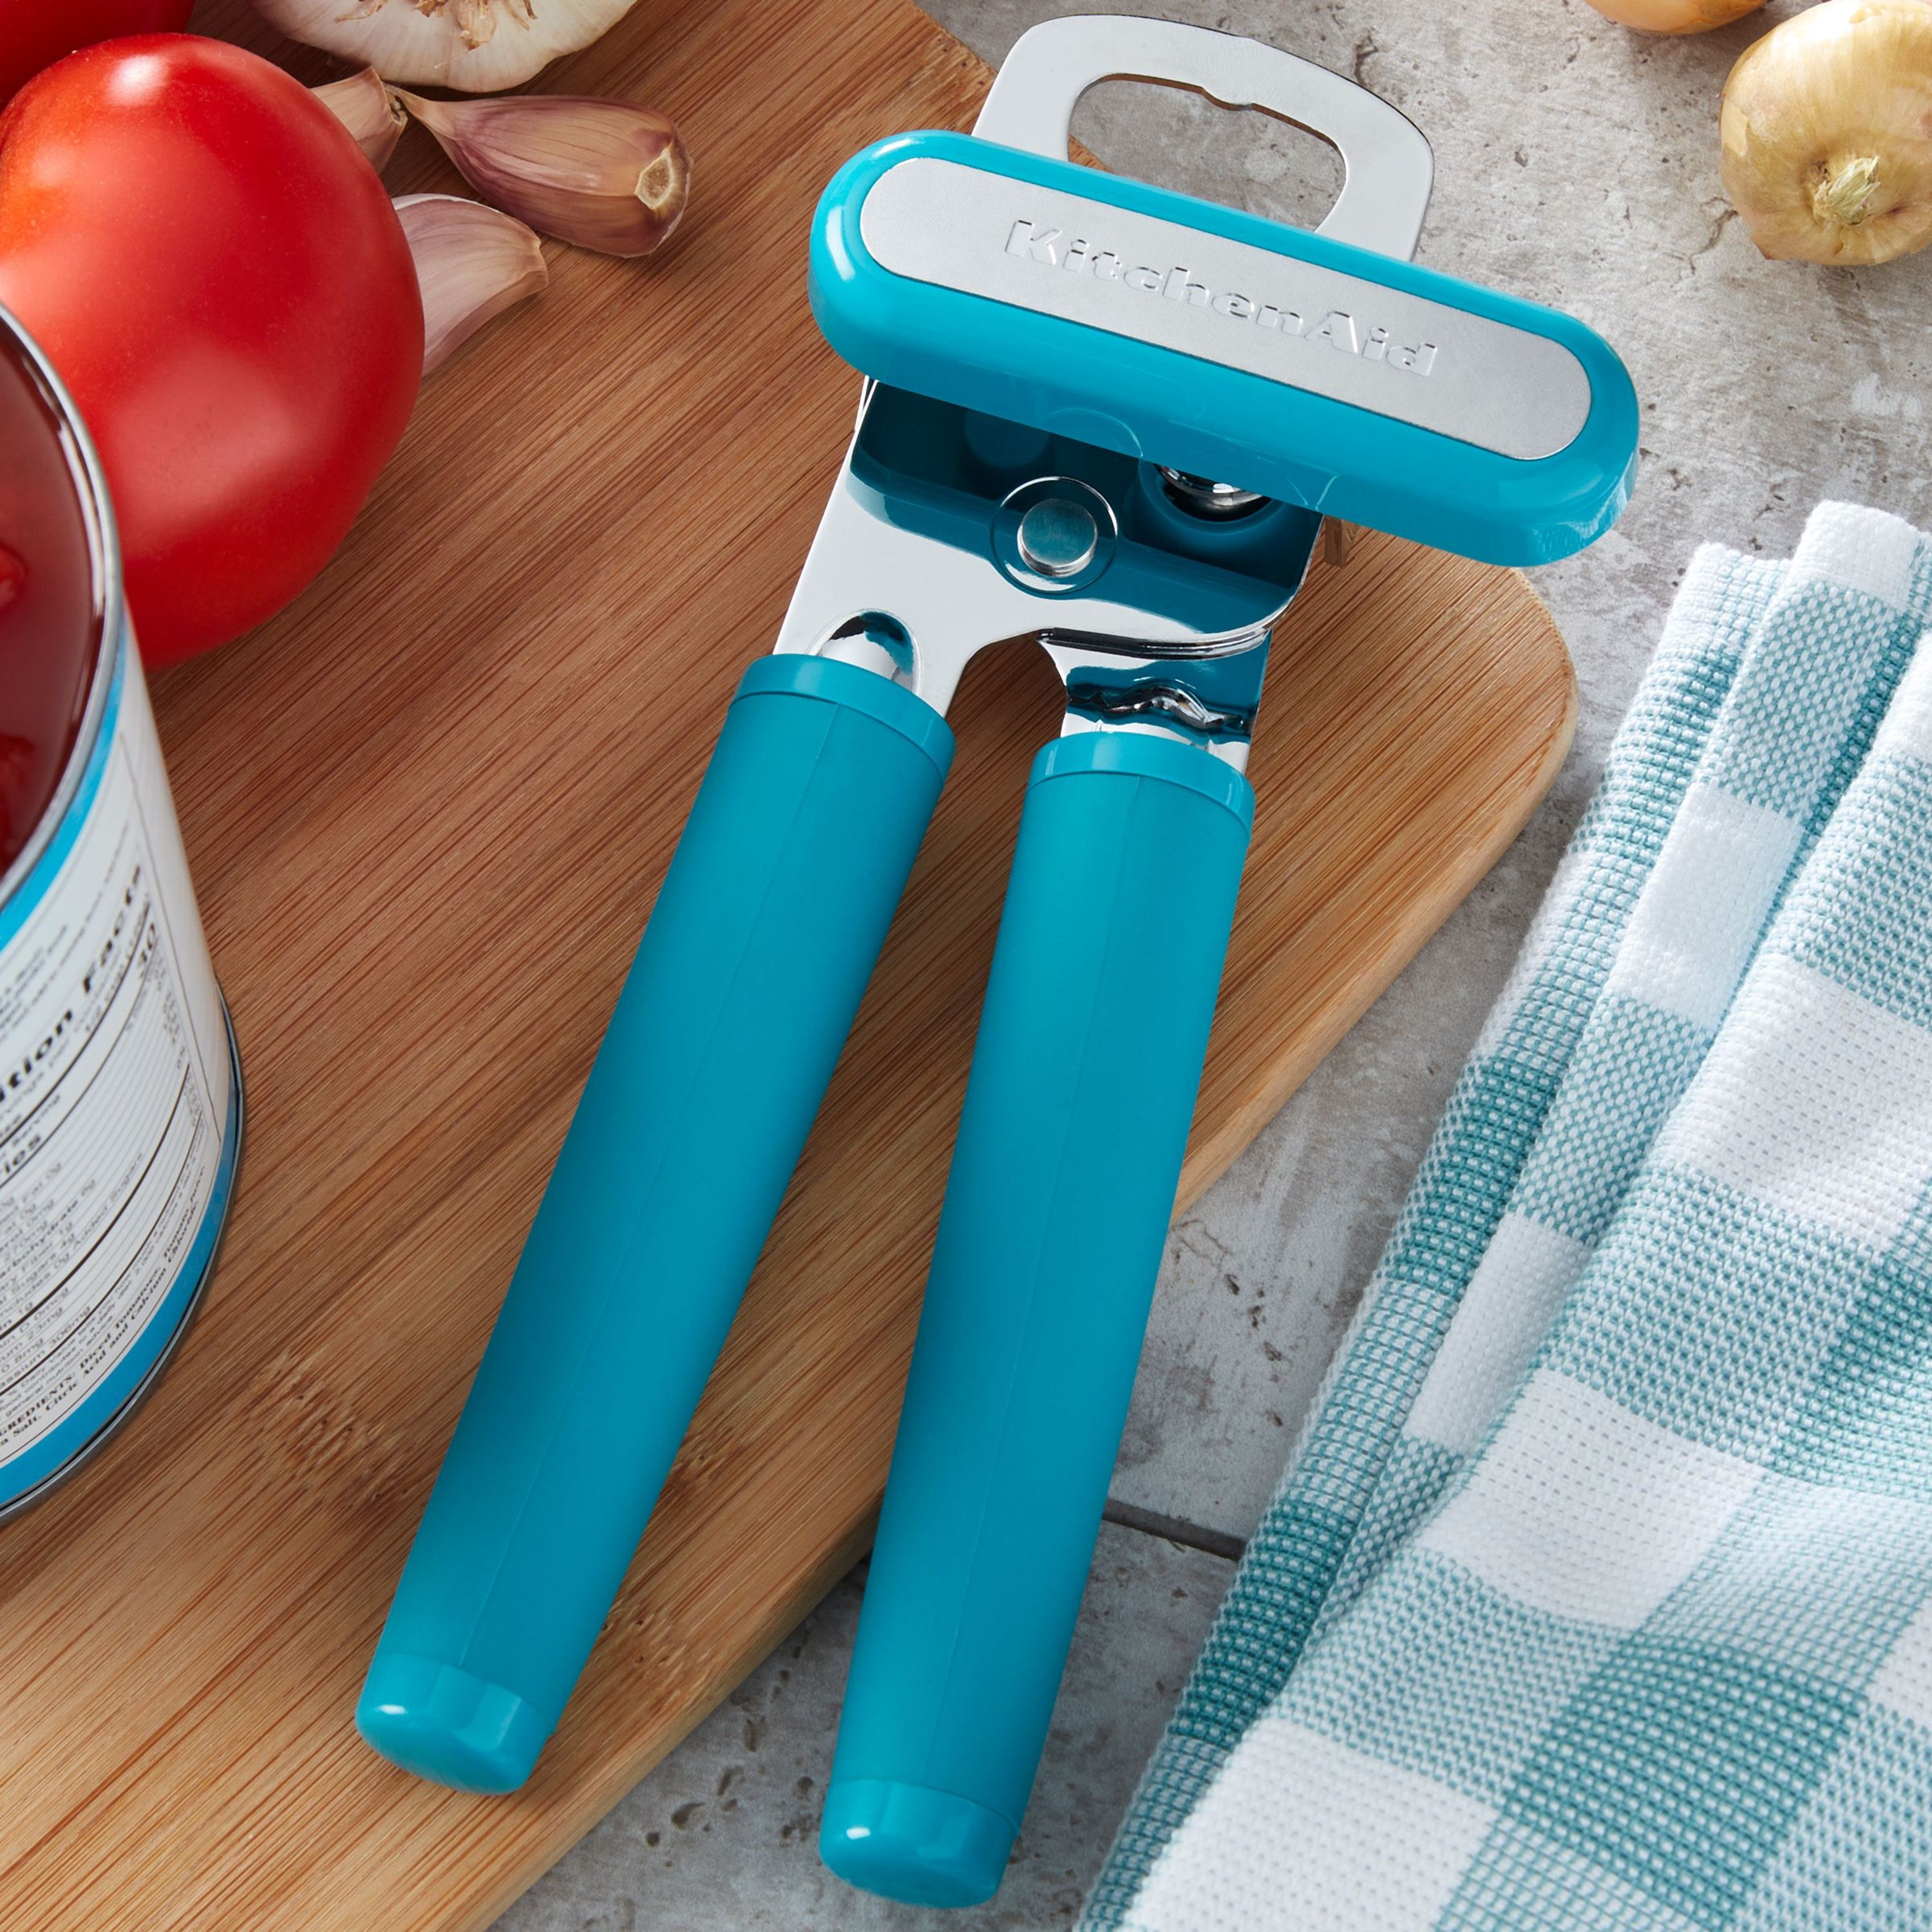 Kitchenaid Stainless Steel Multi-function Can Opener, Ocean Drive, Hand Wash - image 3 of 9